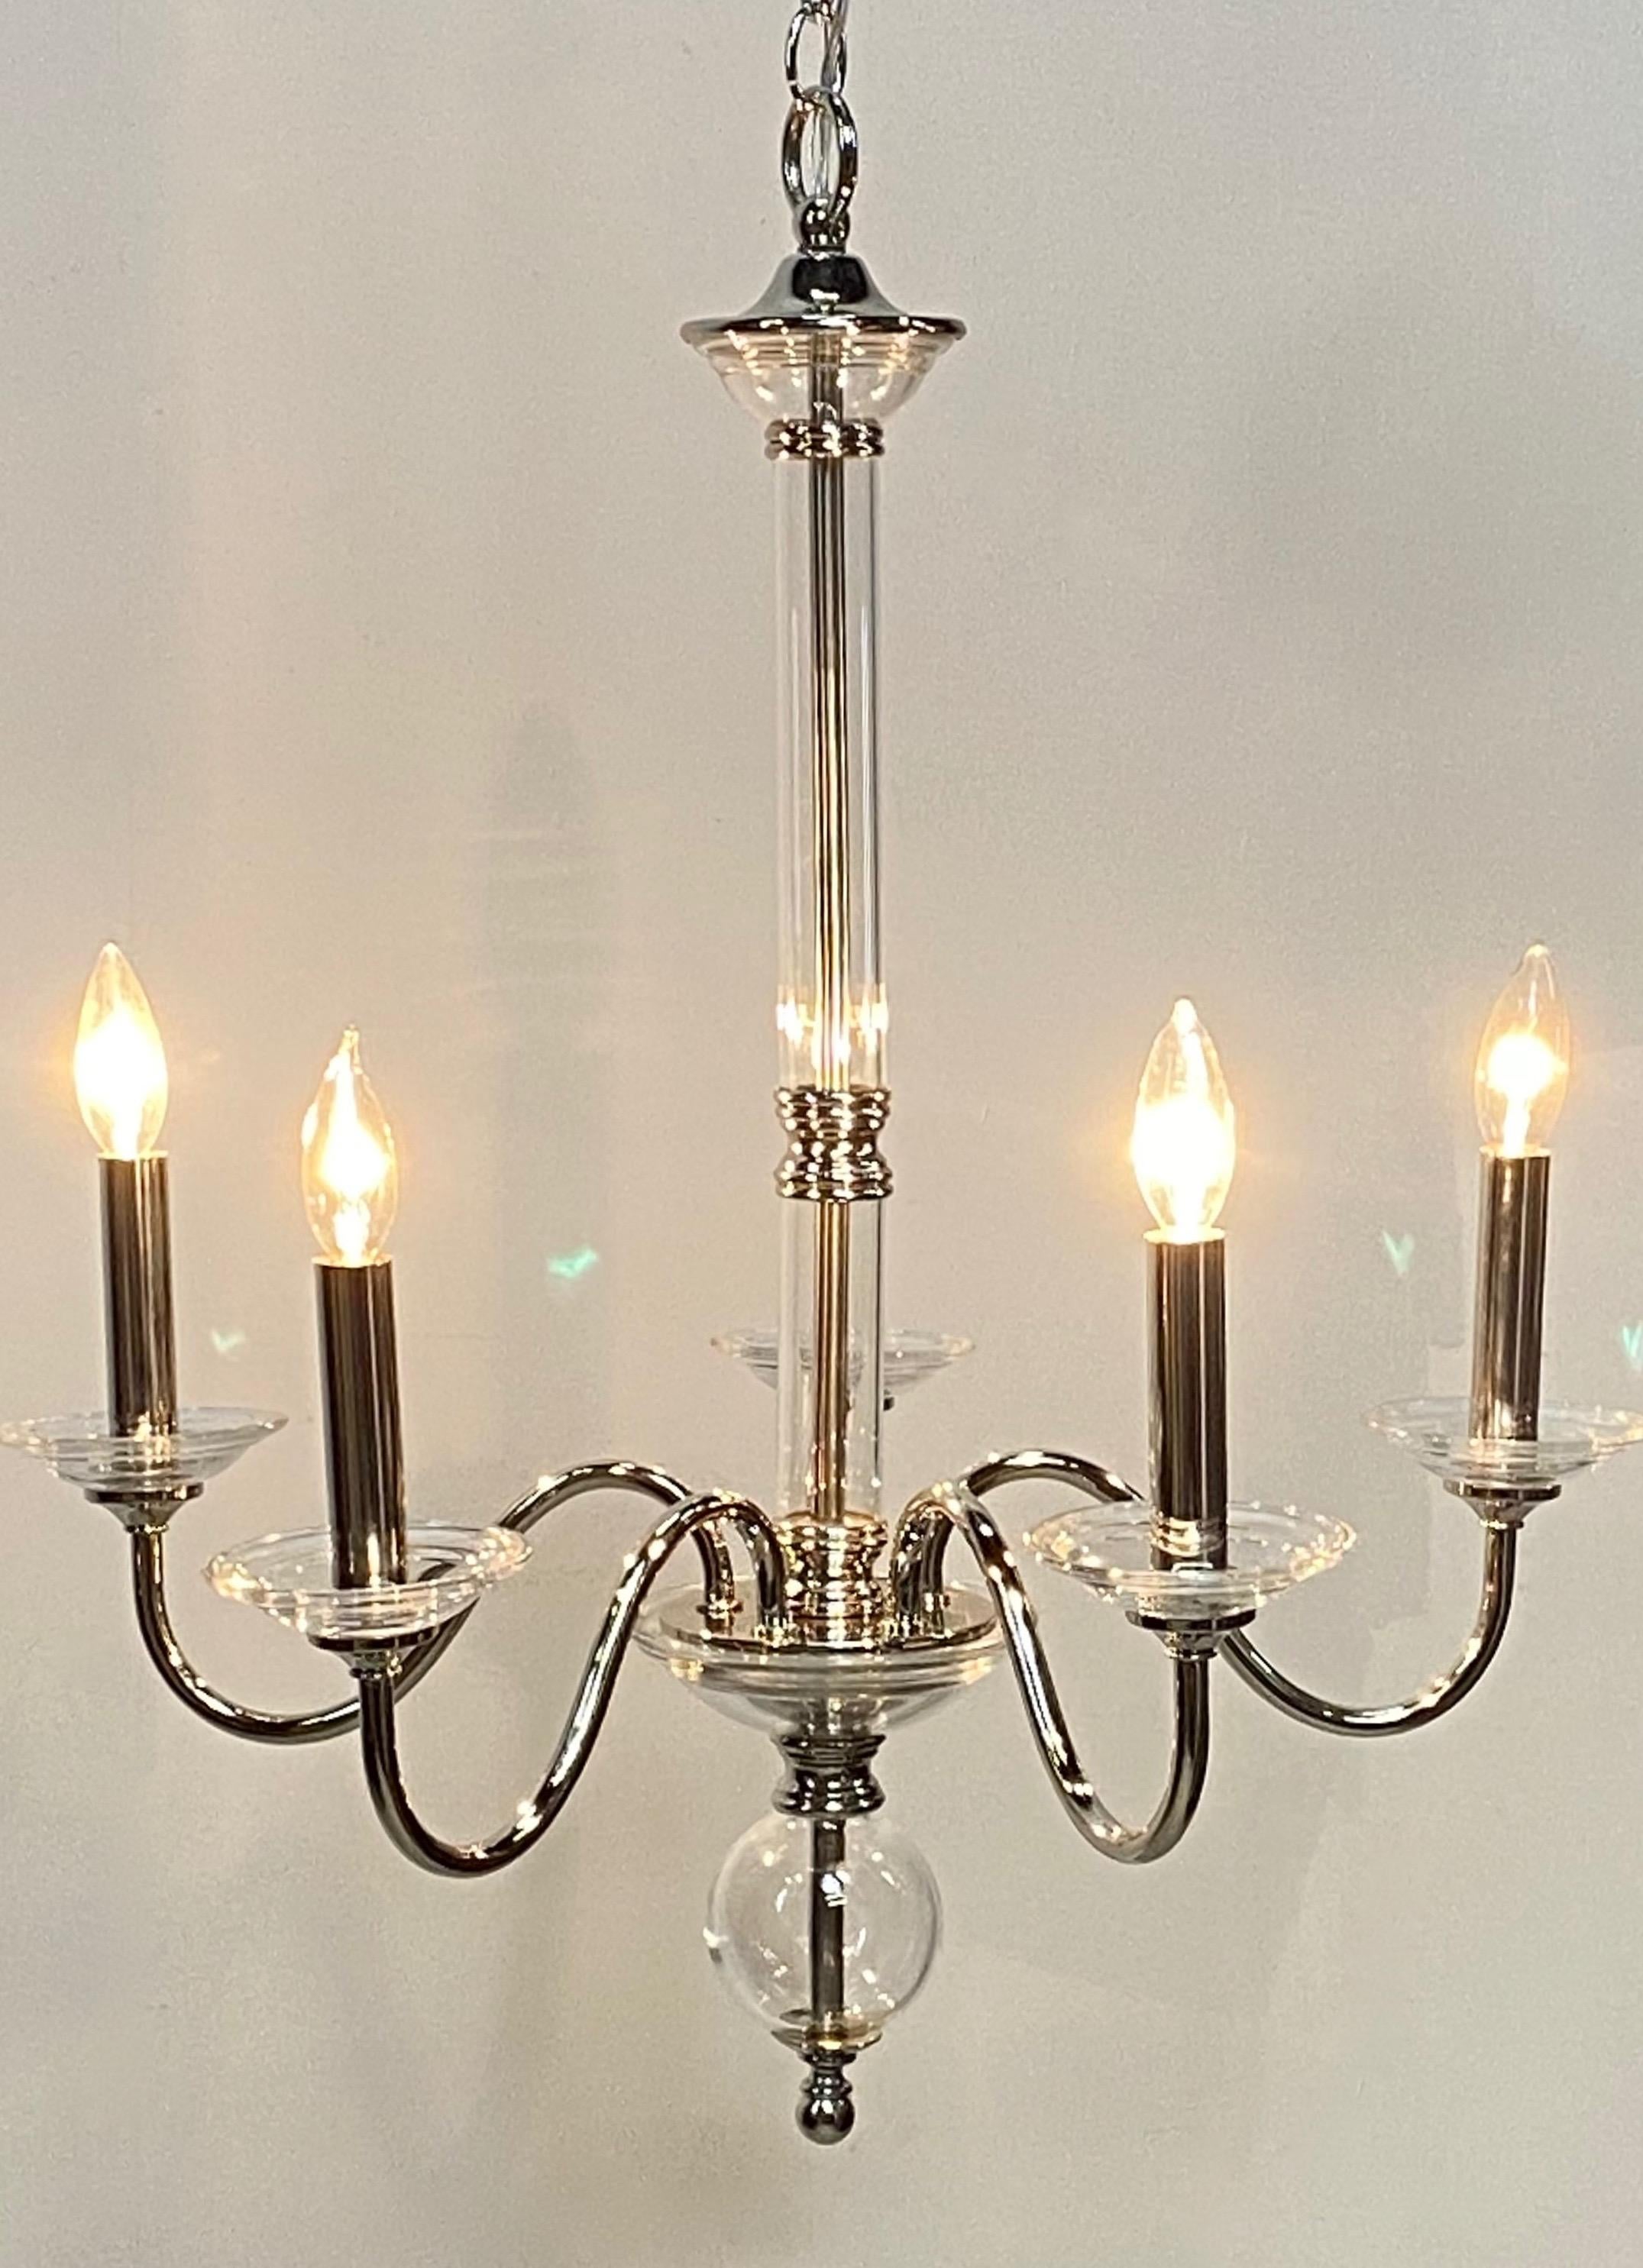 20th Century Mid-Century Modern Chrome and Glass Light Fixture For Sale